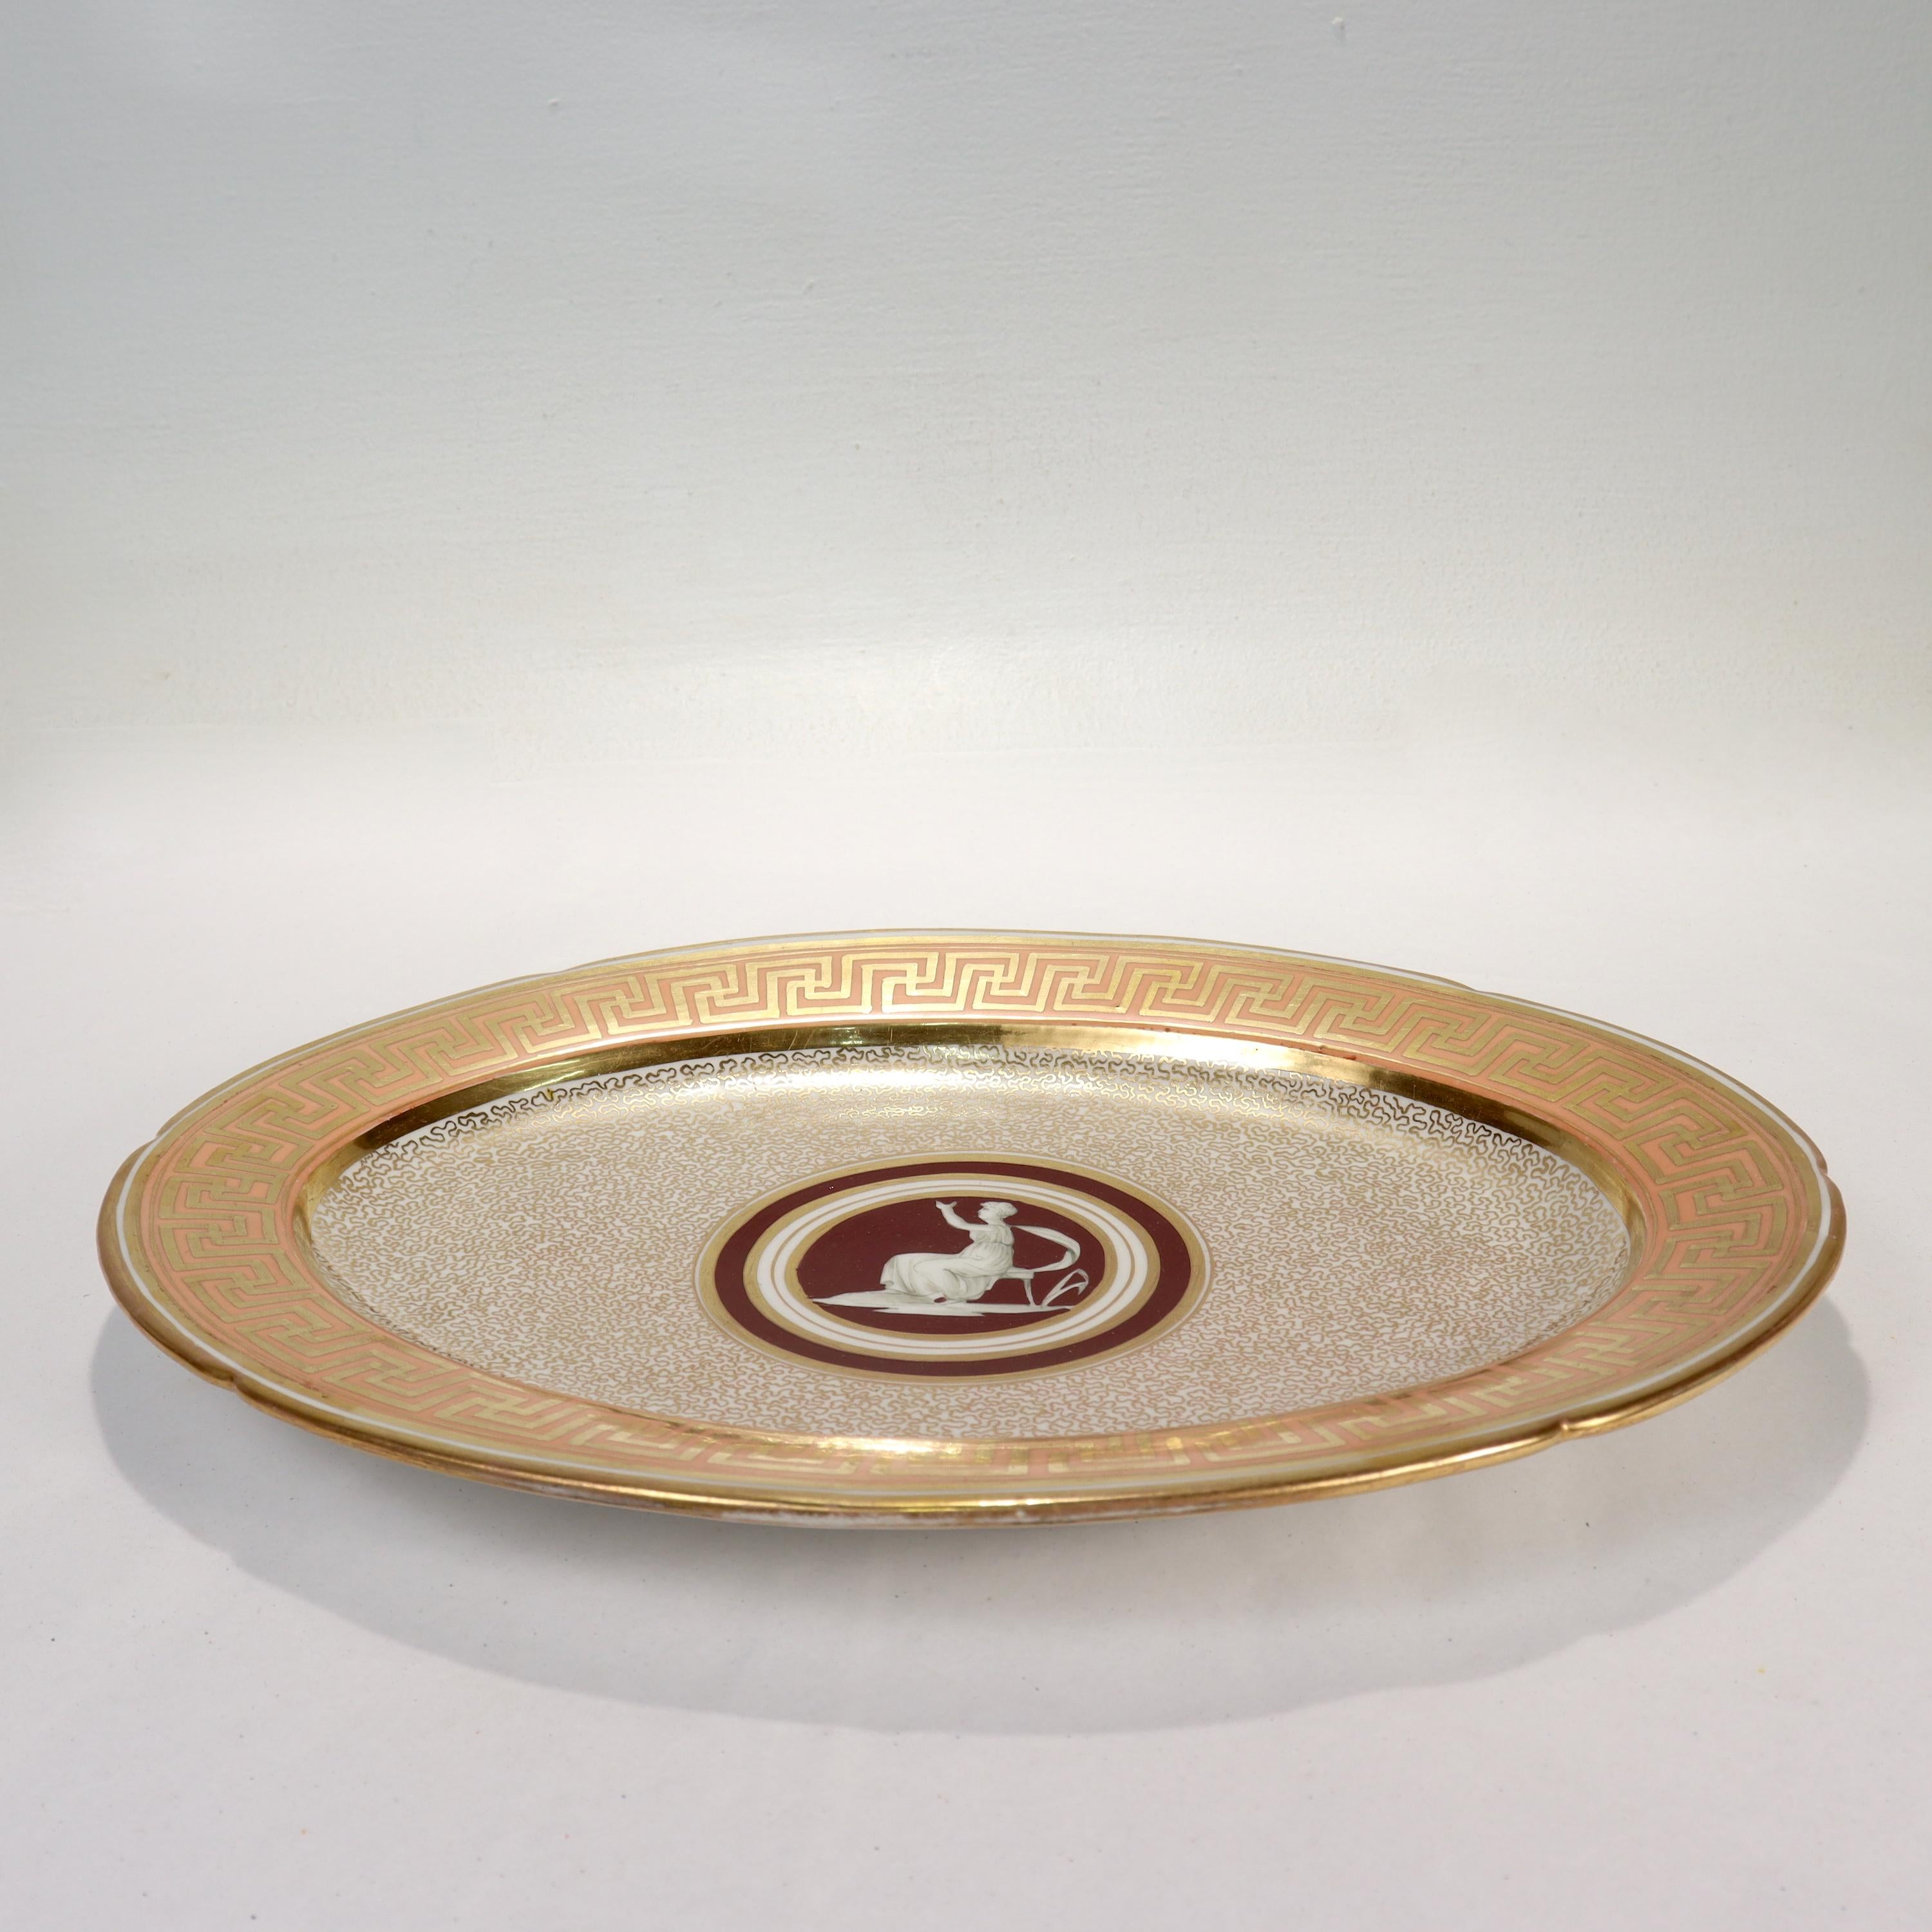 Antique Early 19c English Regency Coalport Porcelain Neoclassical Serving Tray For Sale 1